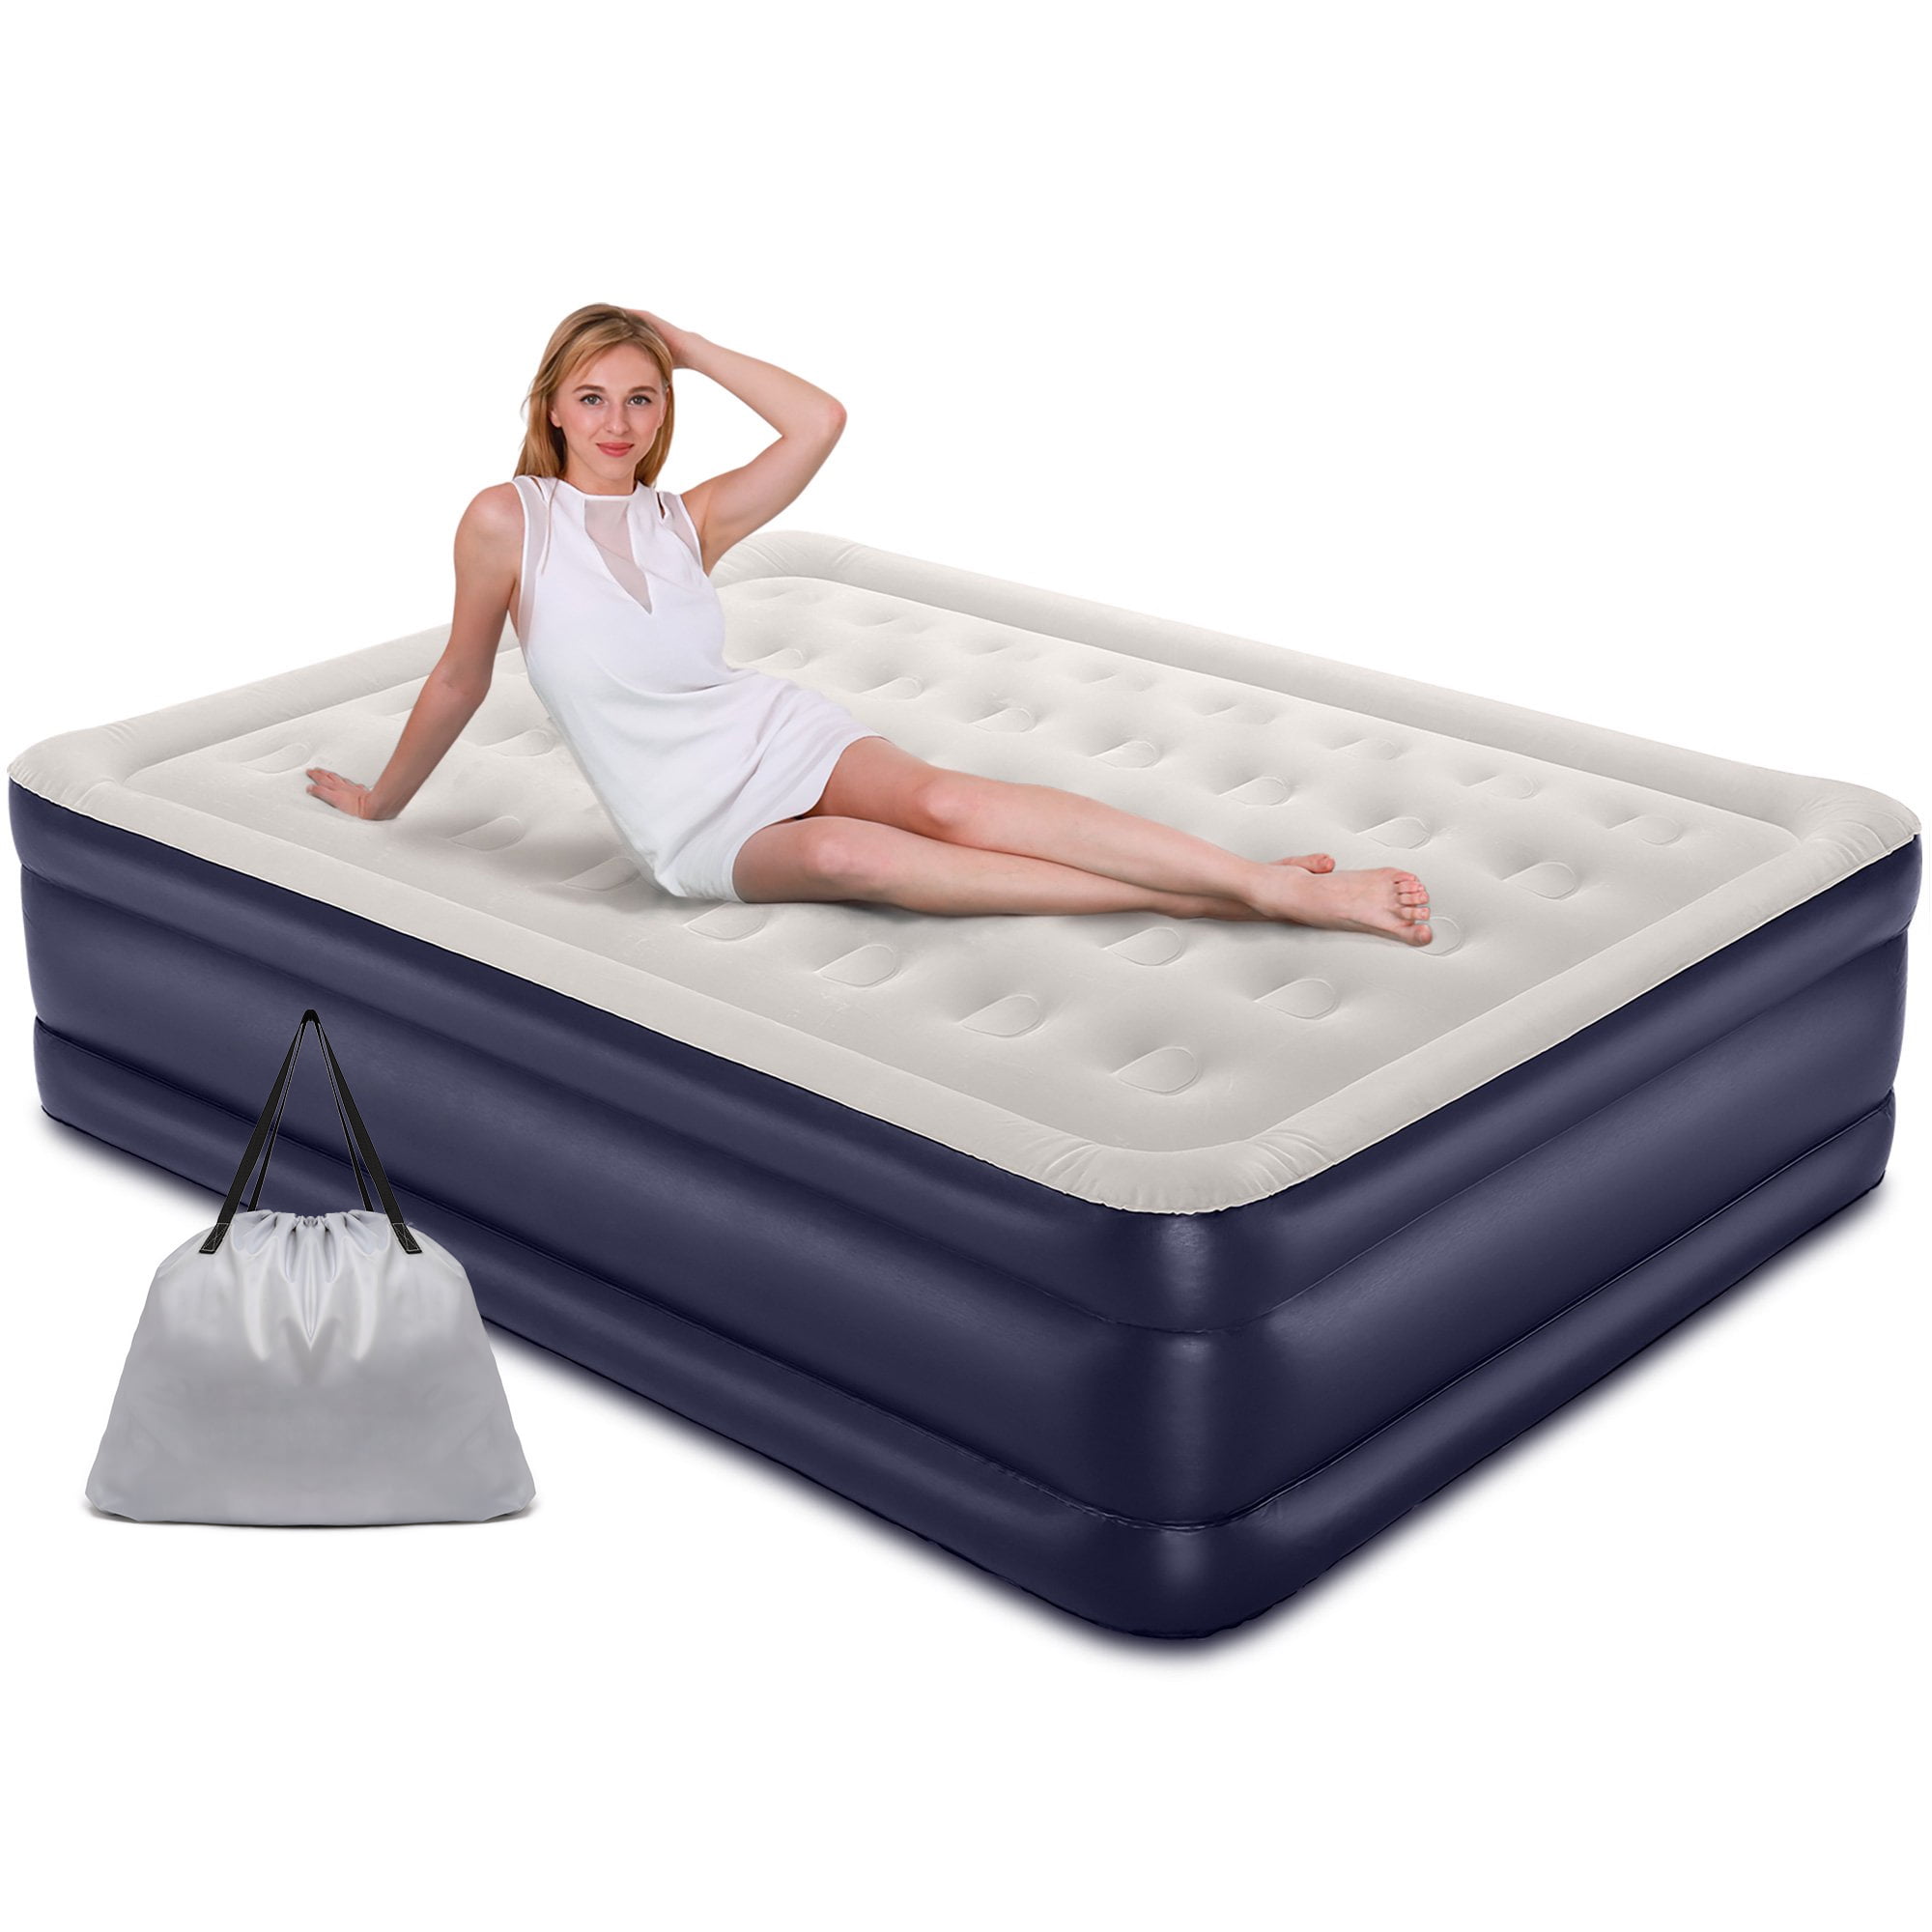 Air Bed Queen Size Double Air Mattress Built-in Pump Elevated Inflatable Pillow 